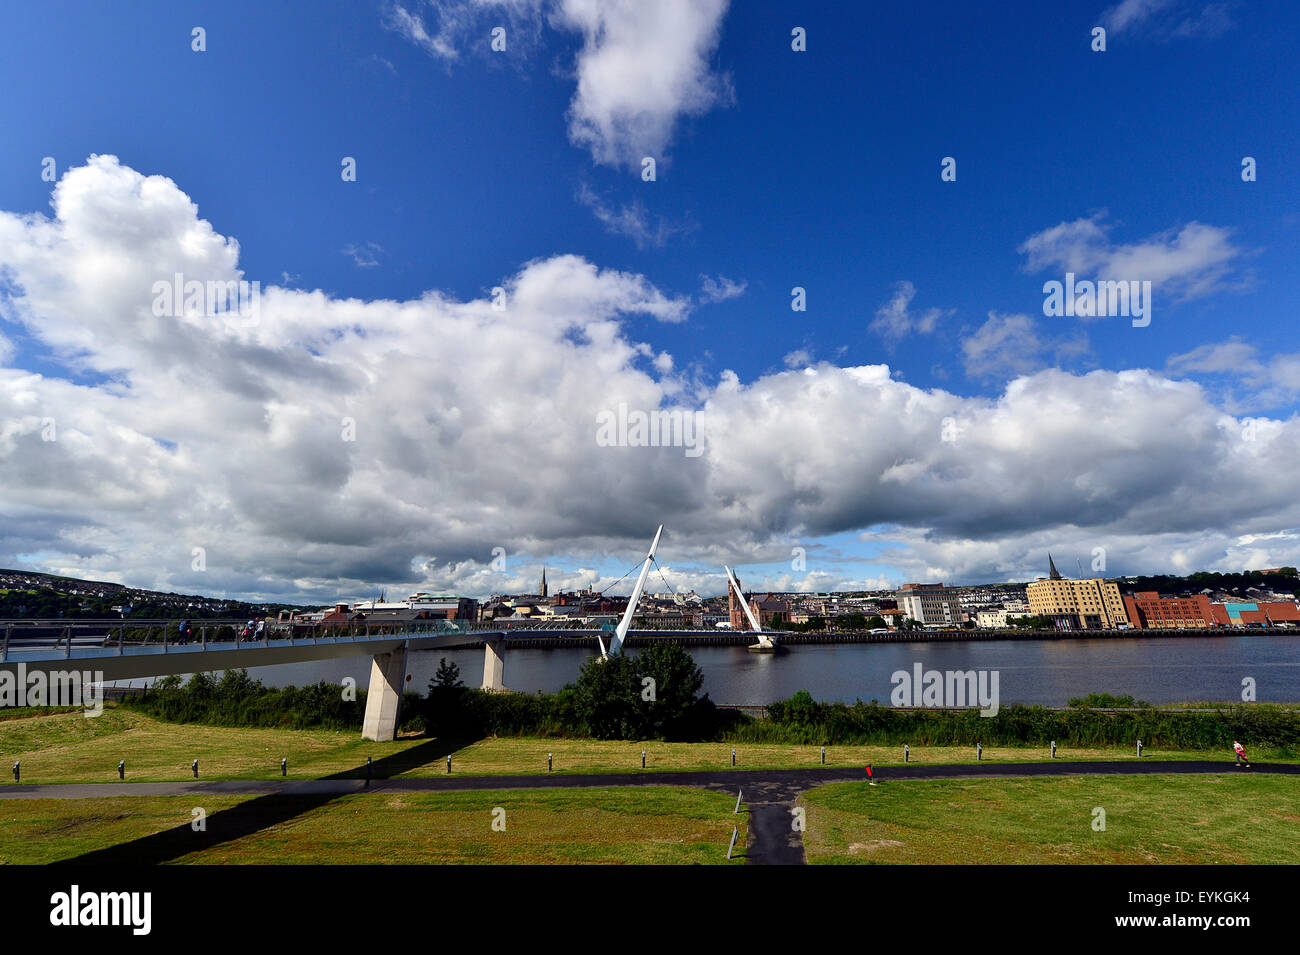 Peace Bridge and River Foyle, Derry, Londonderry, Northern Ireland Stock Photo